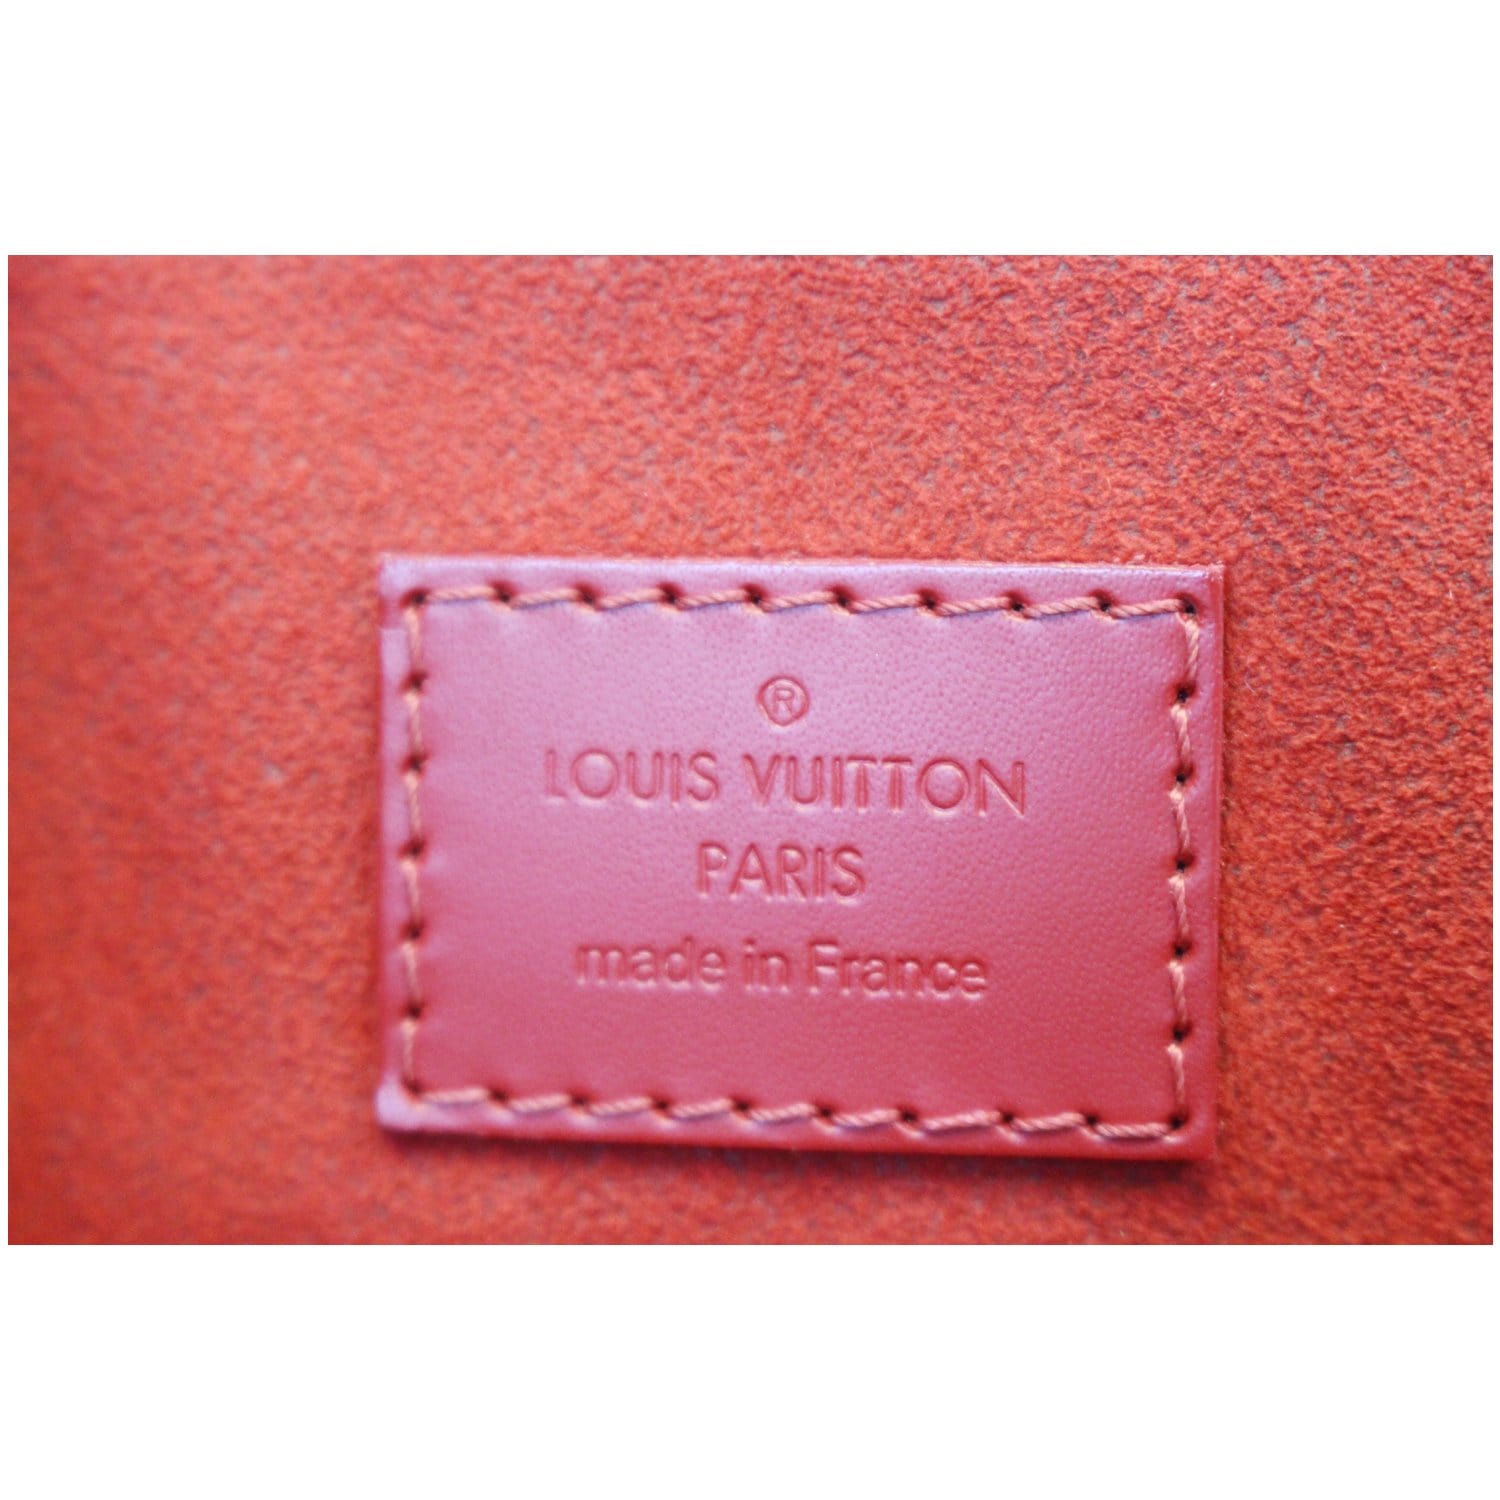 Louis Vuitton Damier Ebene Red Caissa Wallet – Italy Station